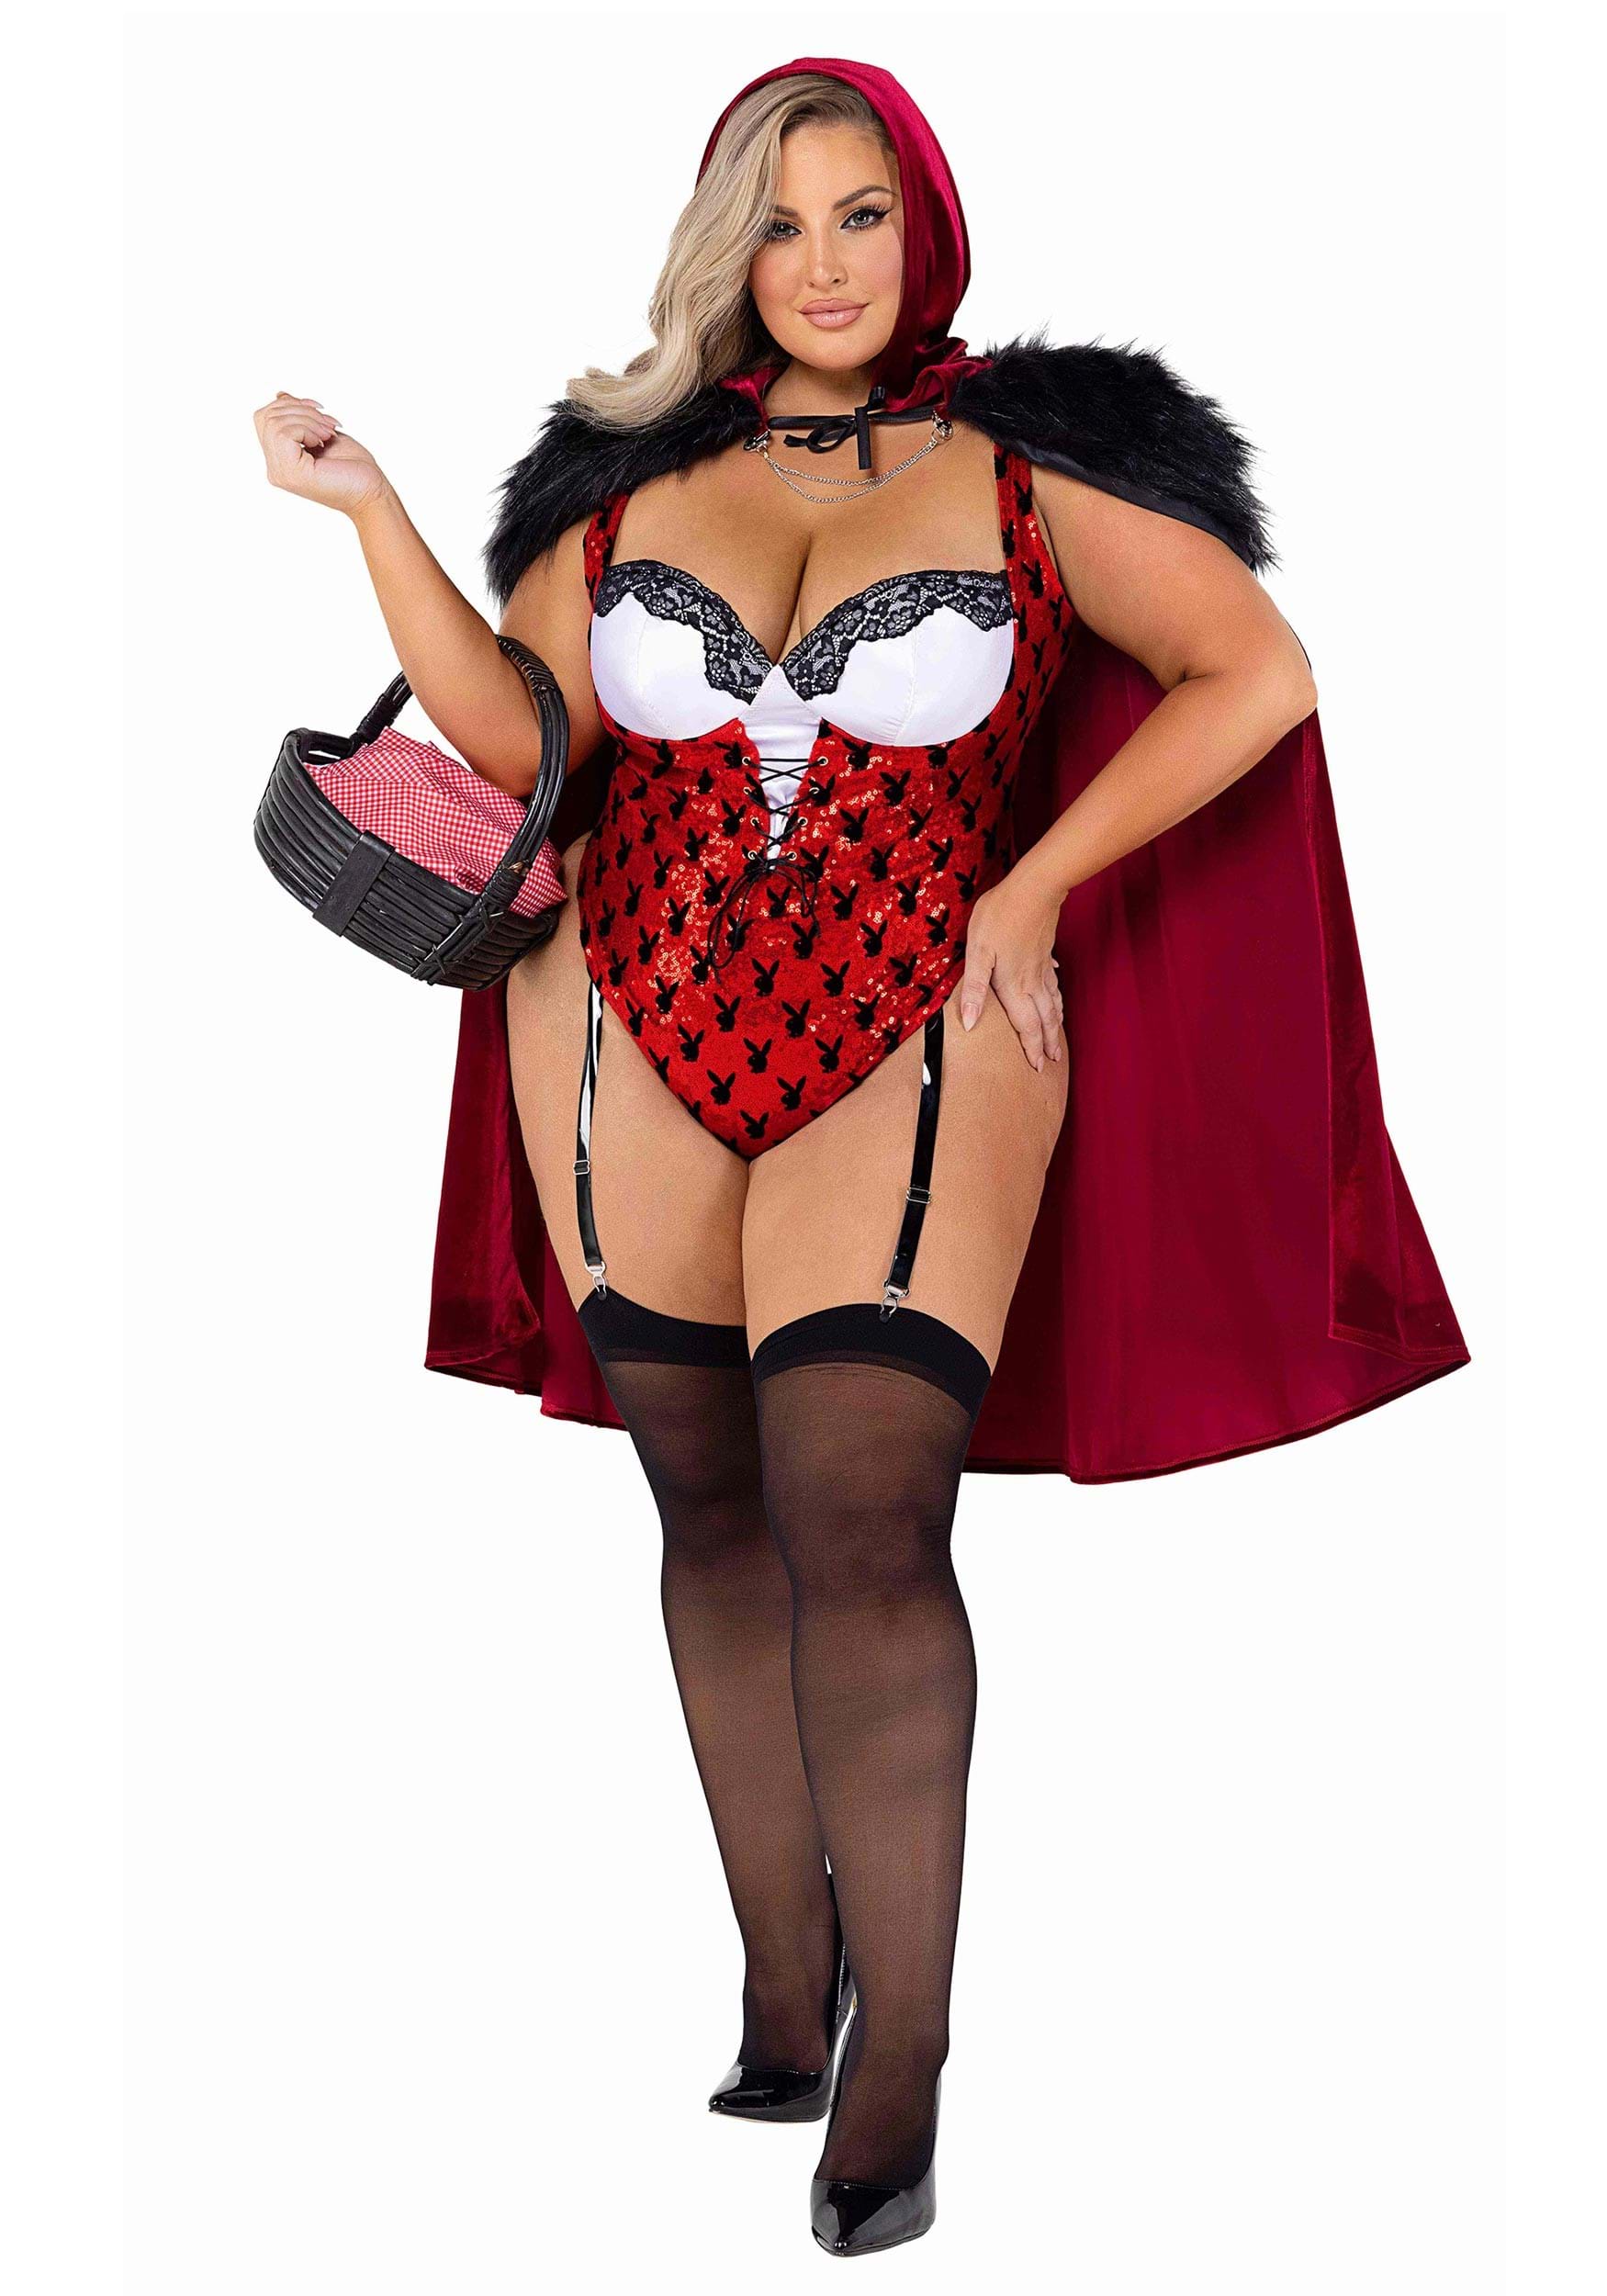 Women’s Plus Size Playboy Red Riding Hood Costume